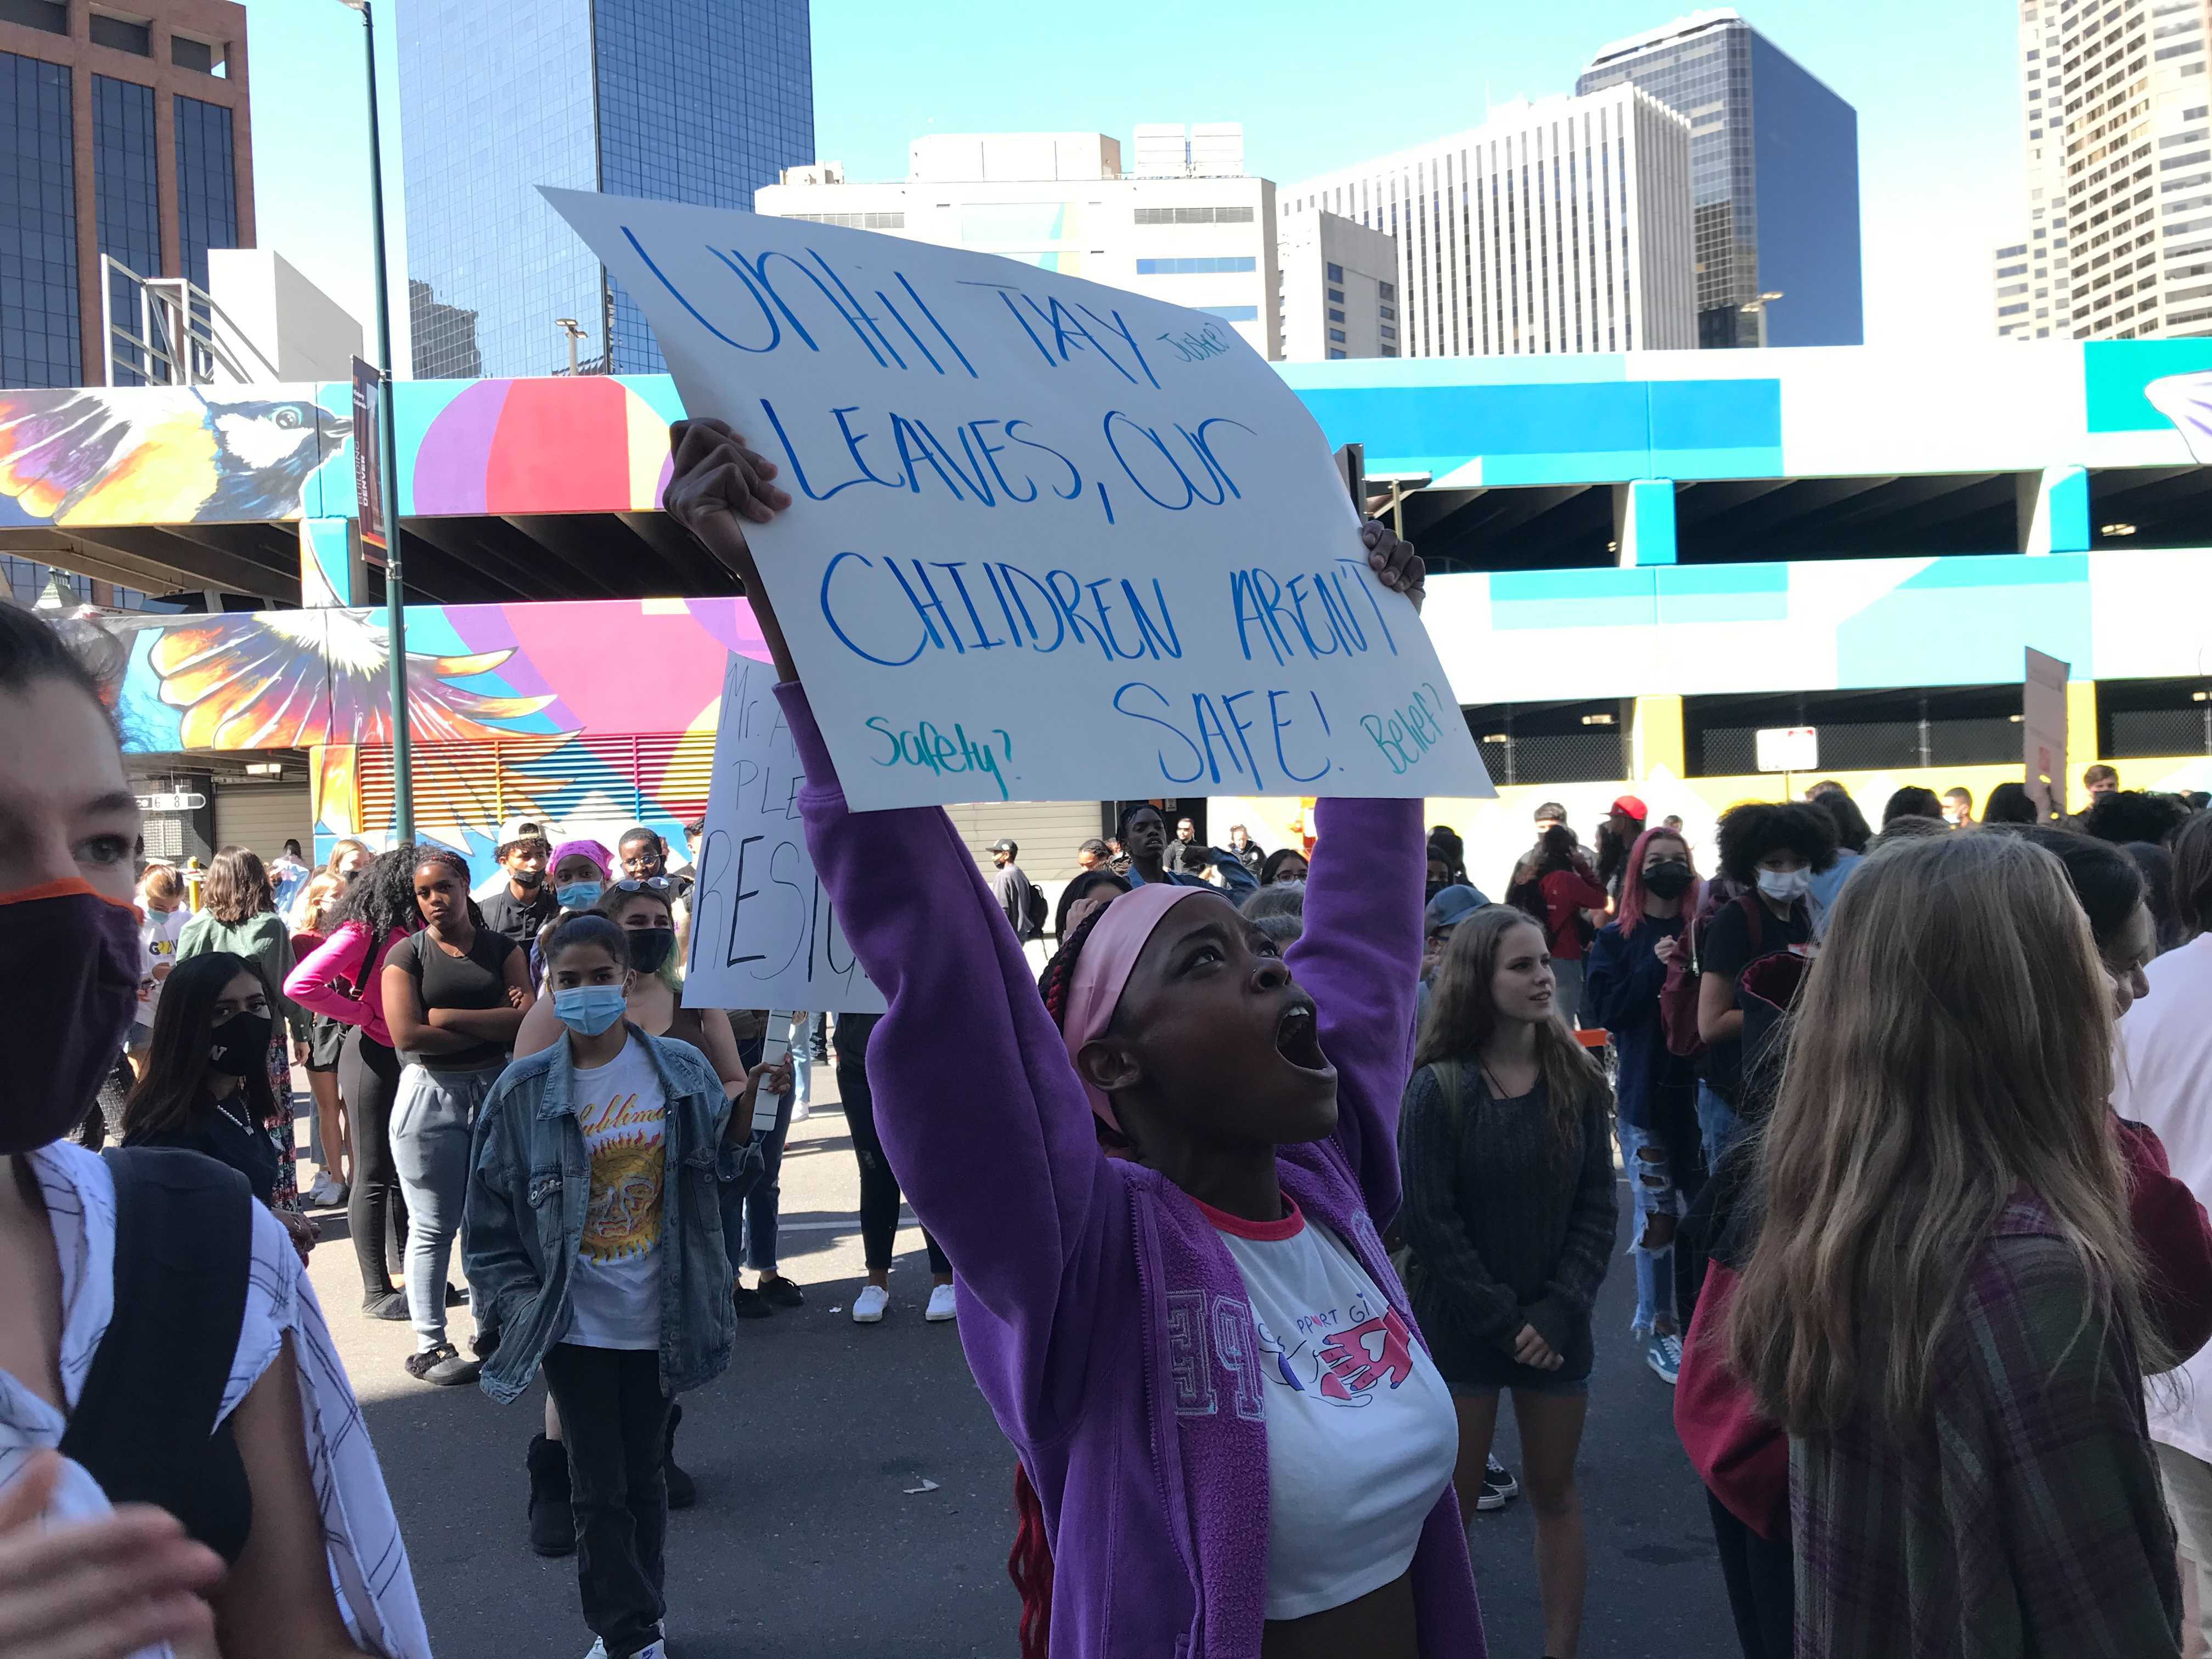 A high school student wearing a purple sweatshirt stands in a crowd. Her arms are raised, holding a sign that reads “Until Tay leaves, our children aren’t safe.” She is shouting.